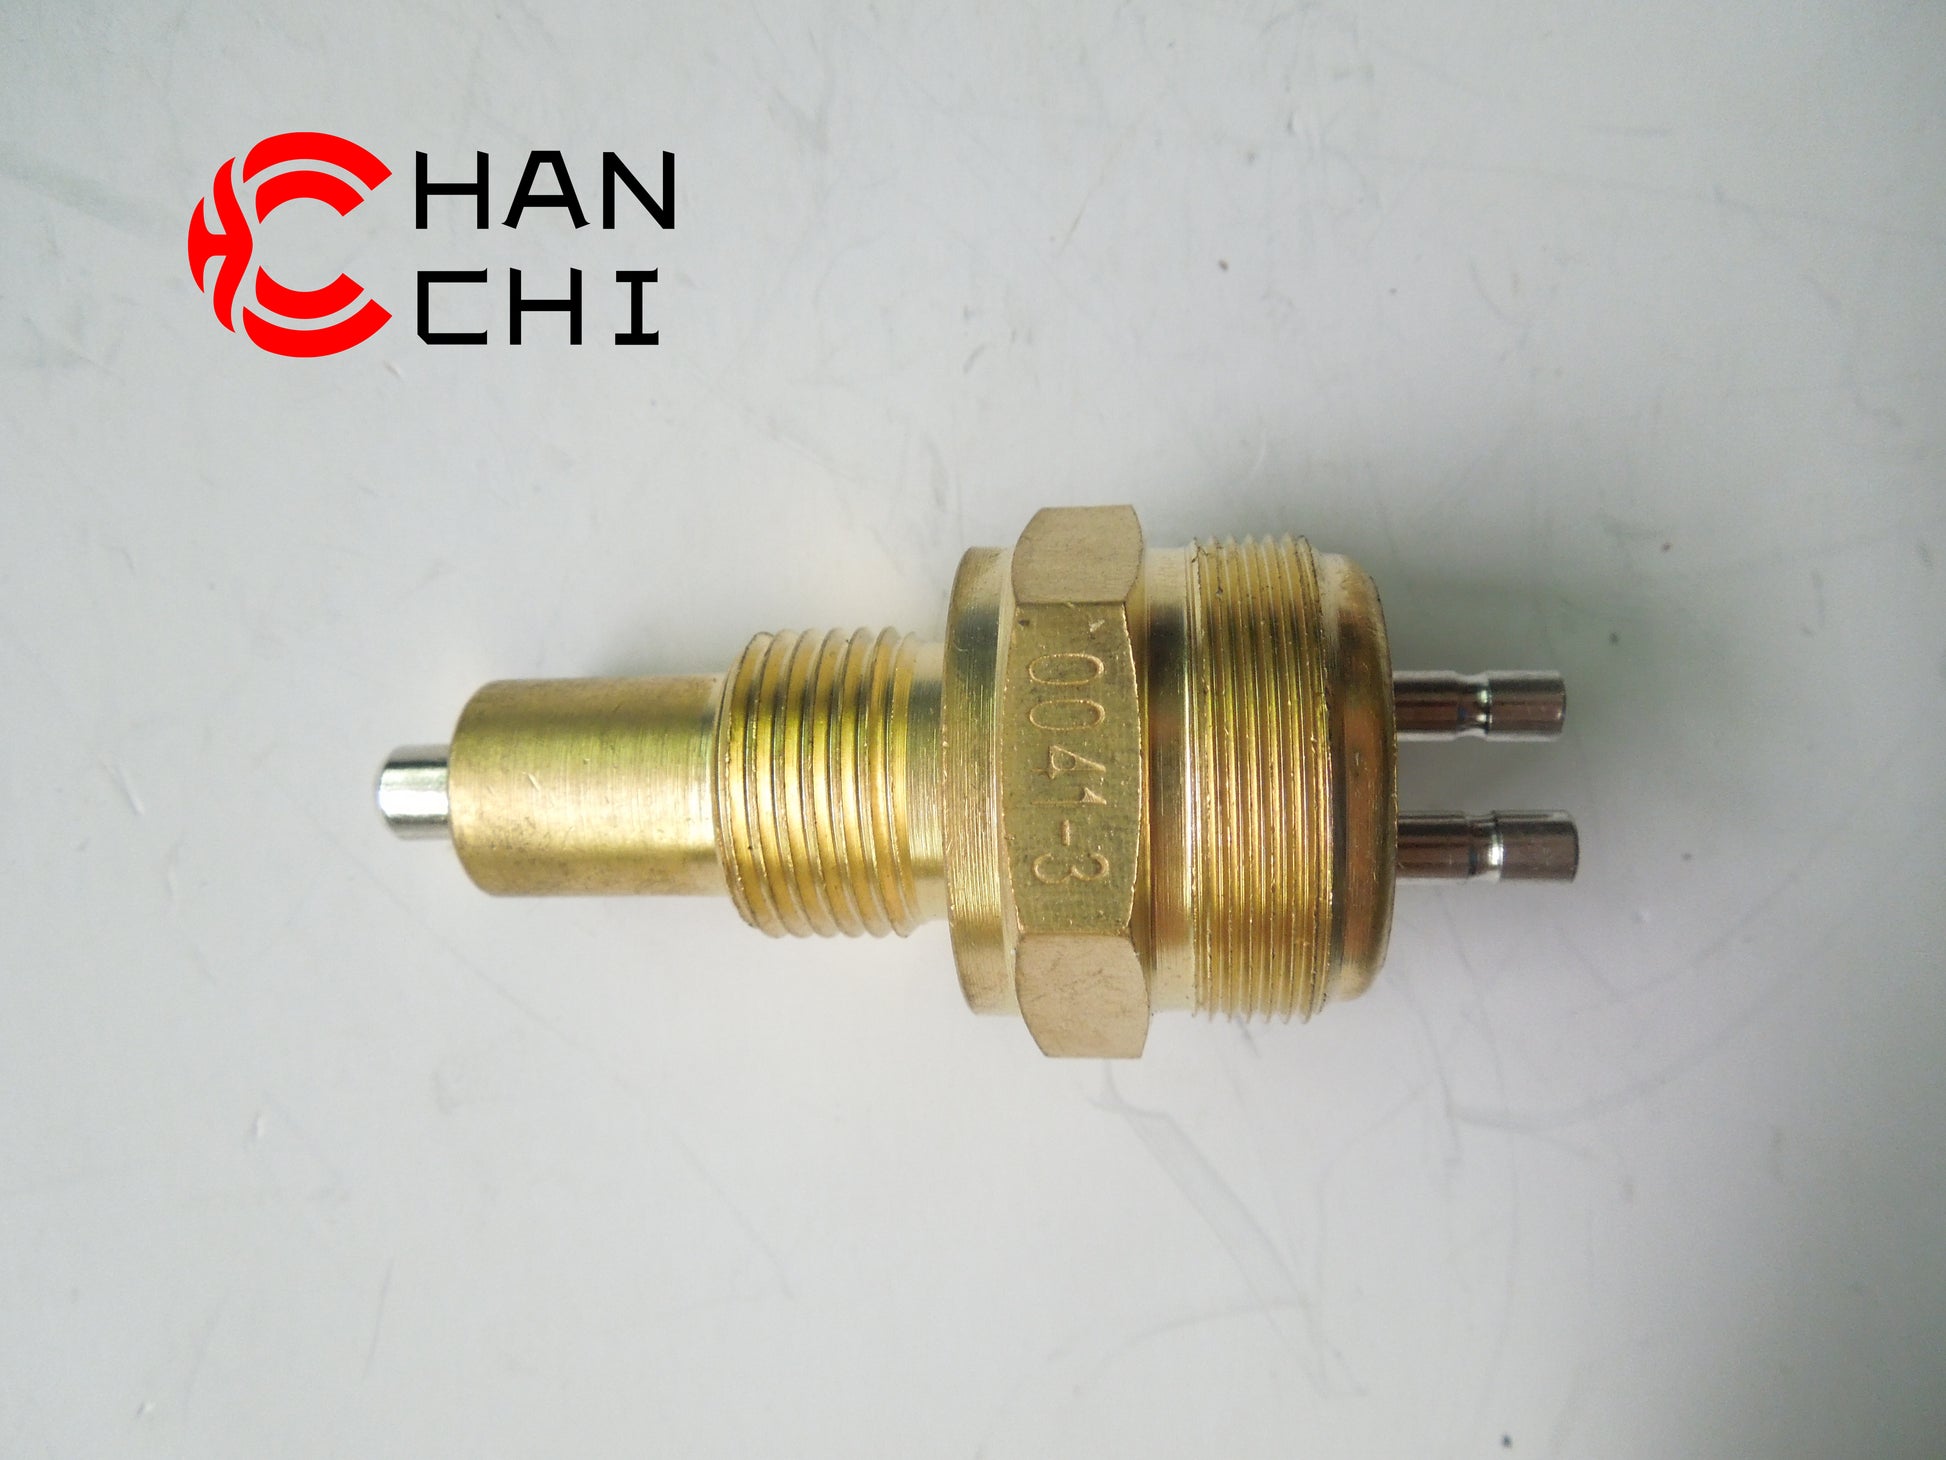 OEM: 0041-3 3781-00031 FASTMaterial: metalColor: black goldenOrigin: Made in ChinaWeight: 50gPacking List: 1* Neutral Switch More Service We can provide OEM Manufacturing service We can Be your one-step solution for Auto Parts We can provide technical scheme for you Feel Free to Contact Us, We will get back to you as soon as possible.